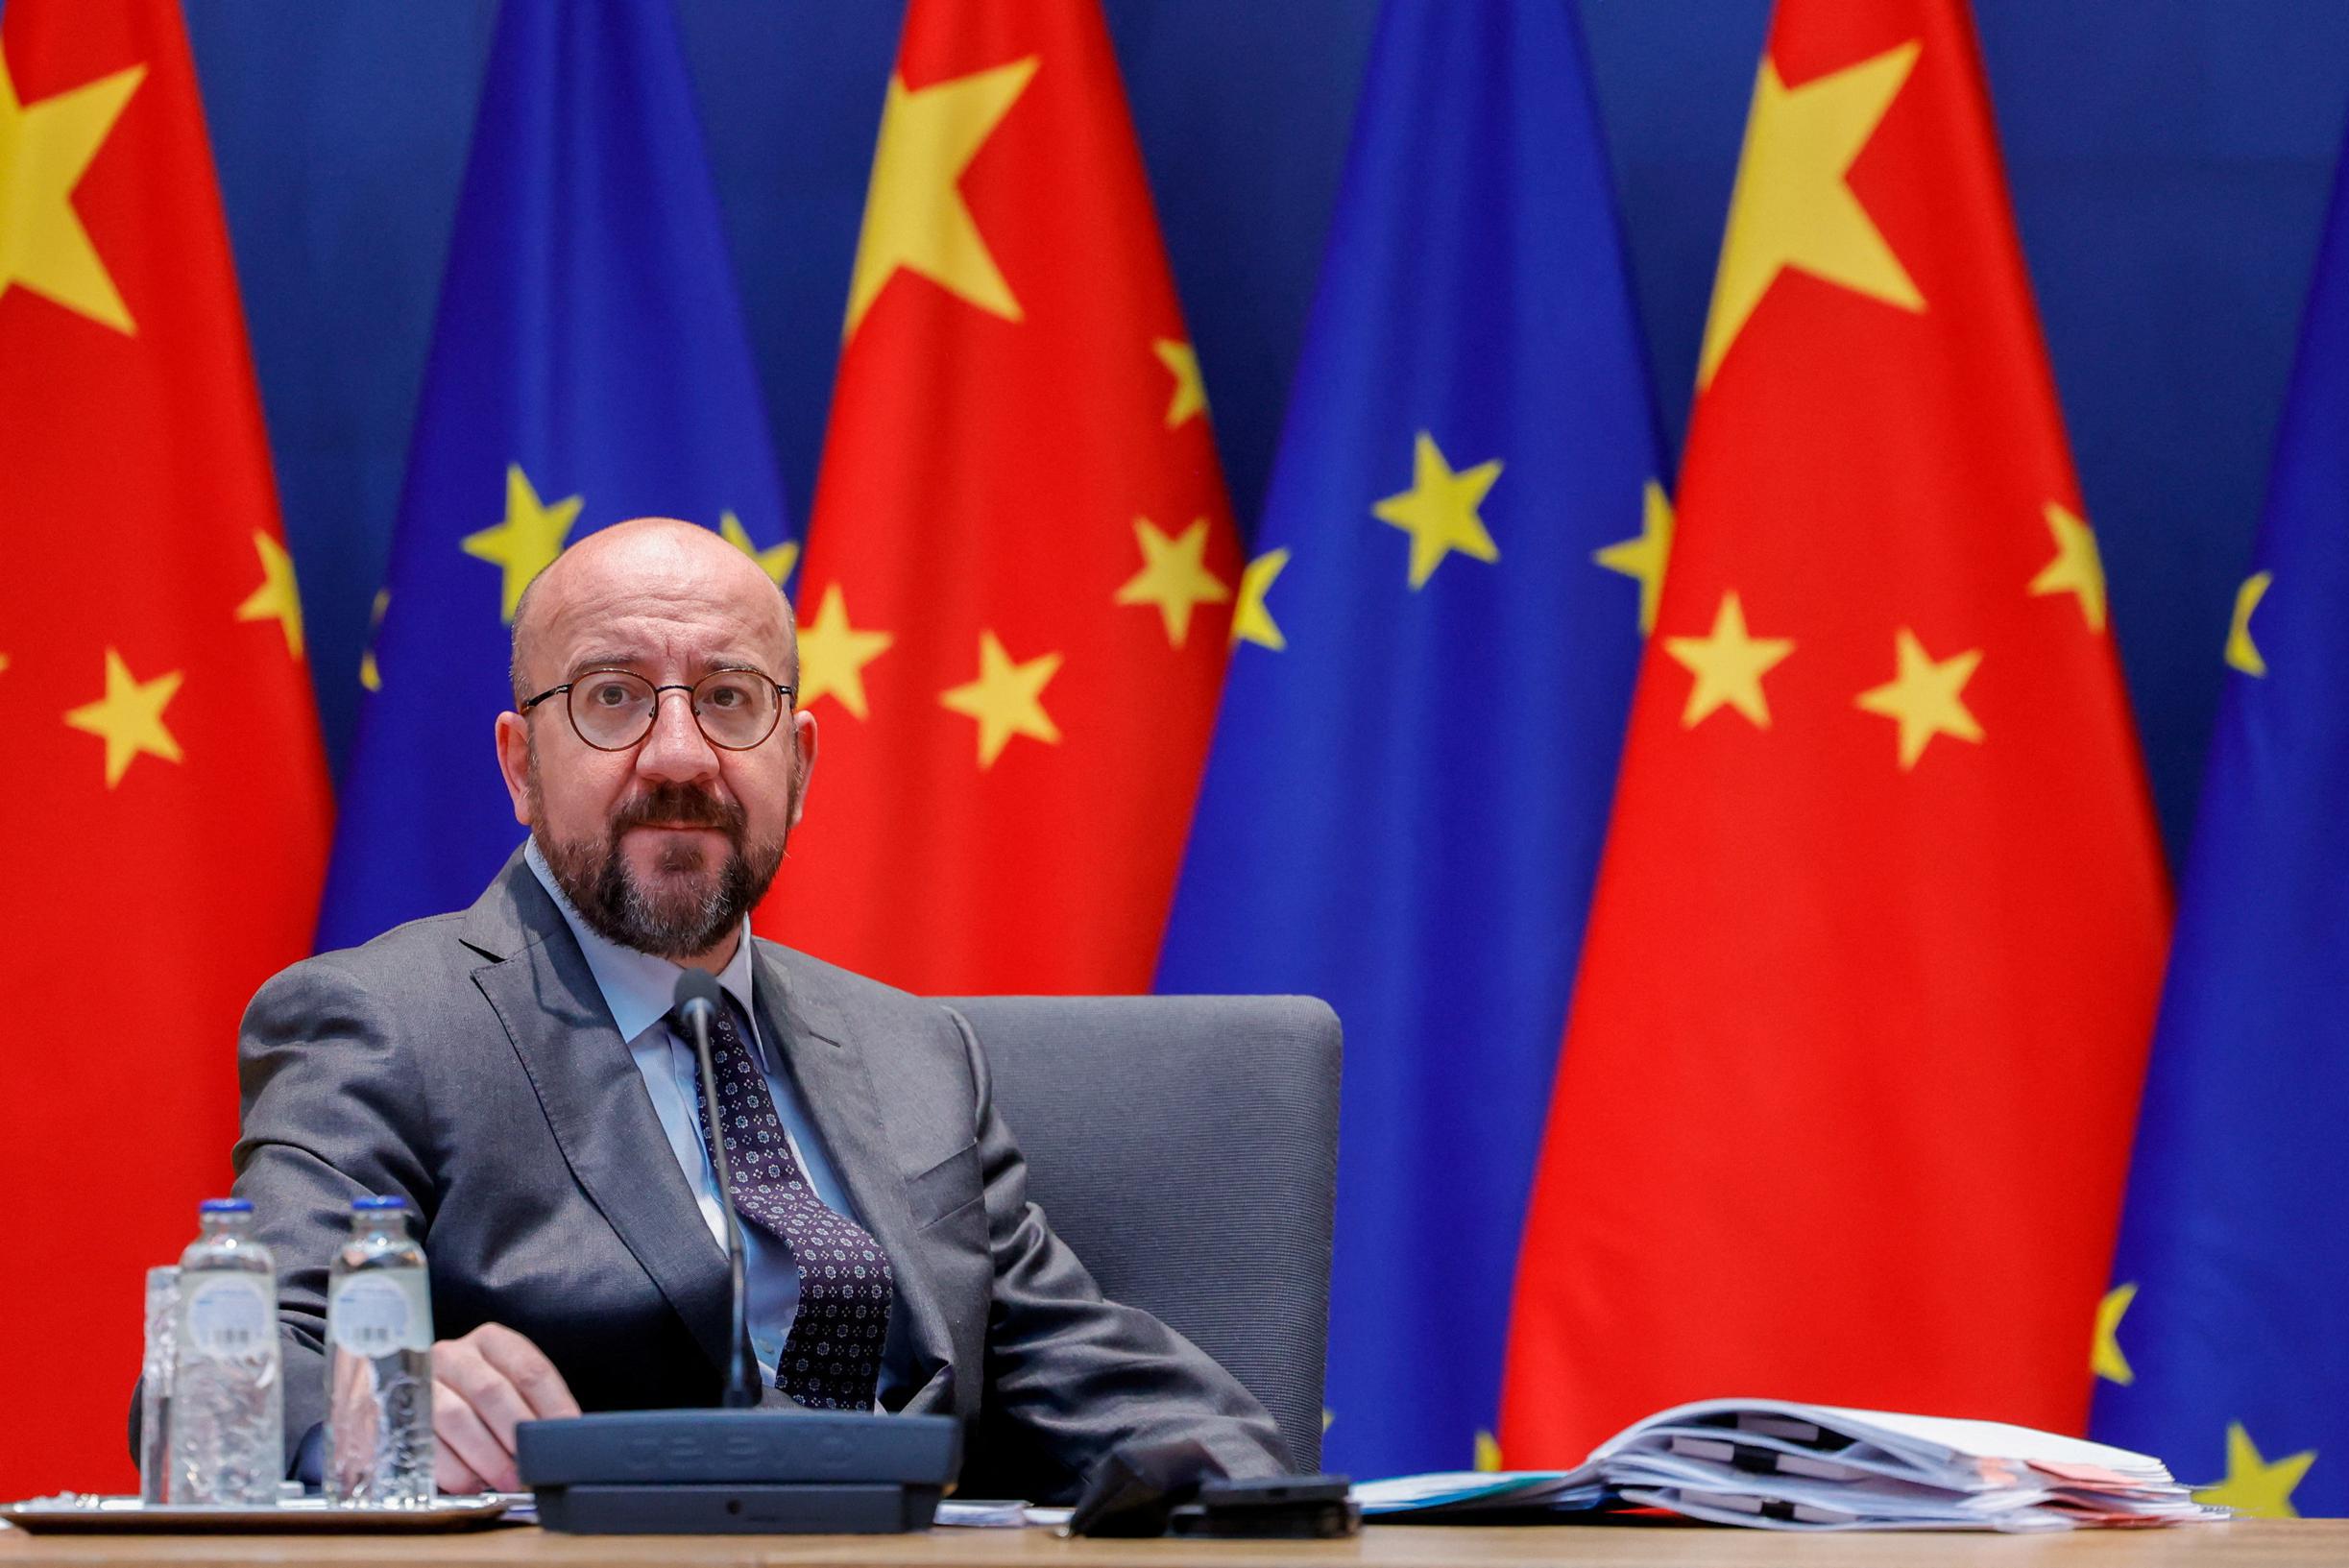 Chinese authorities canceled critical speech by Charles Michel